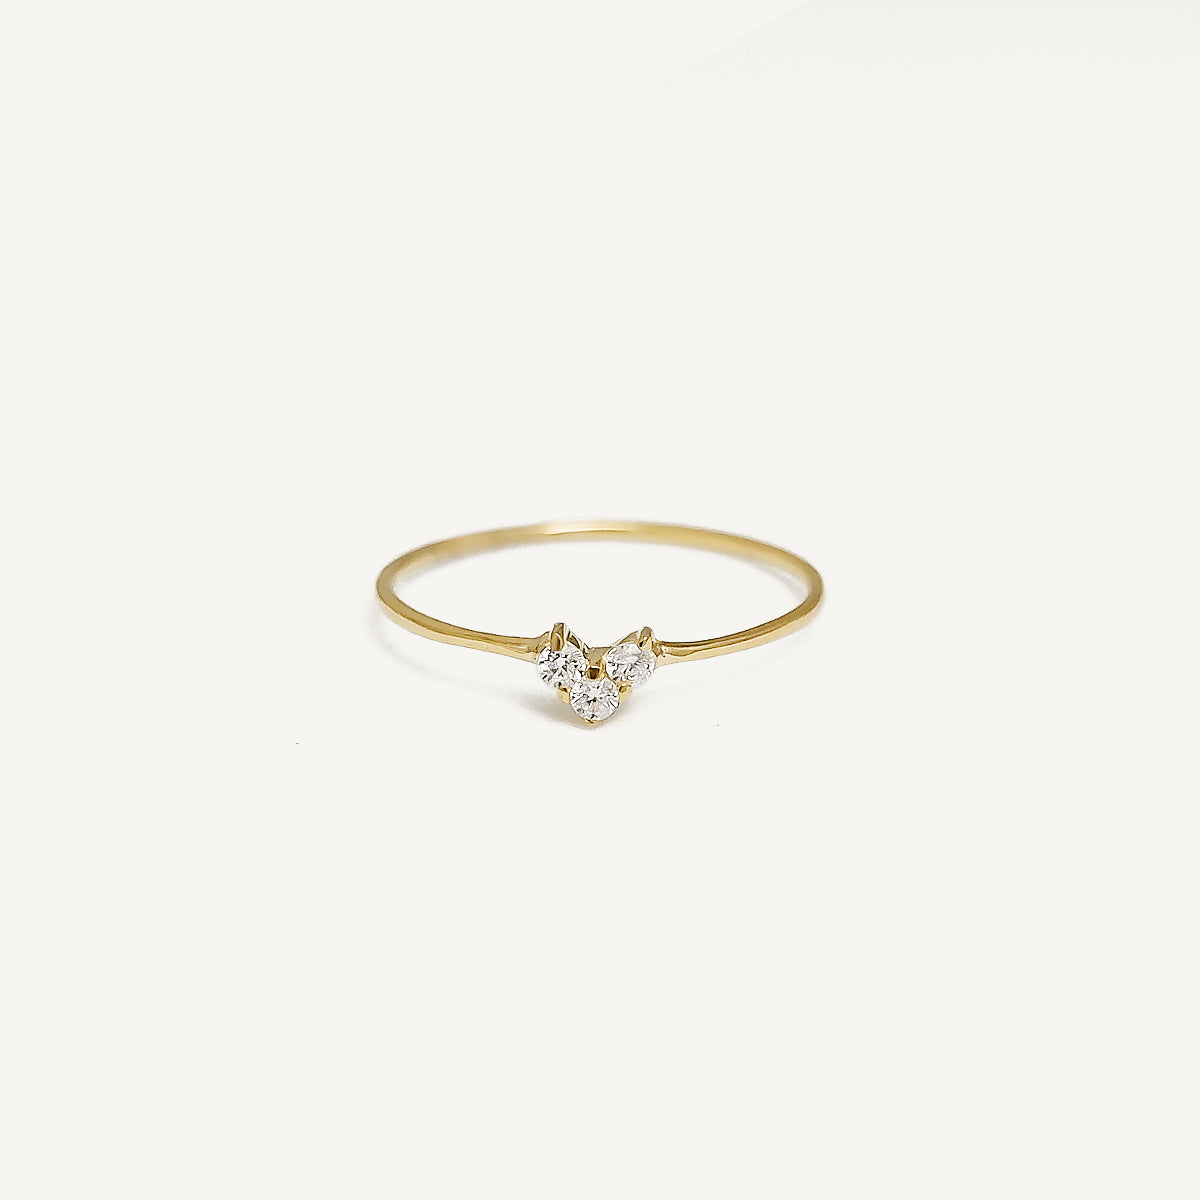 The Tiny Heart Birthstone Ring in Solid Gold